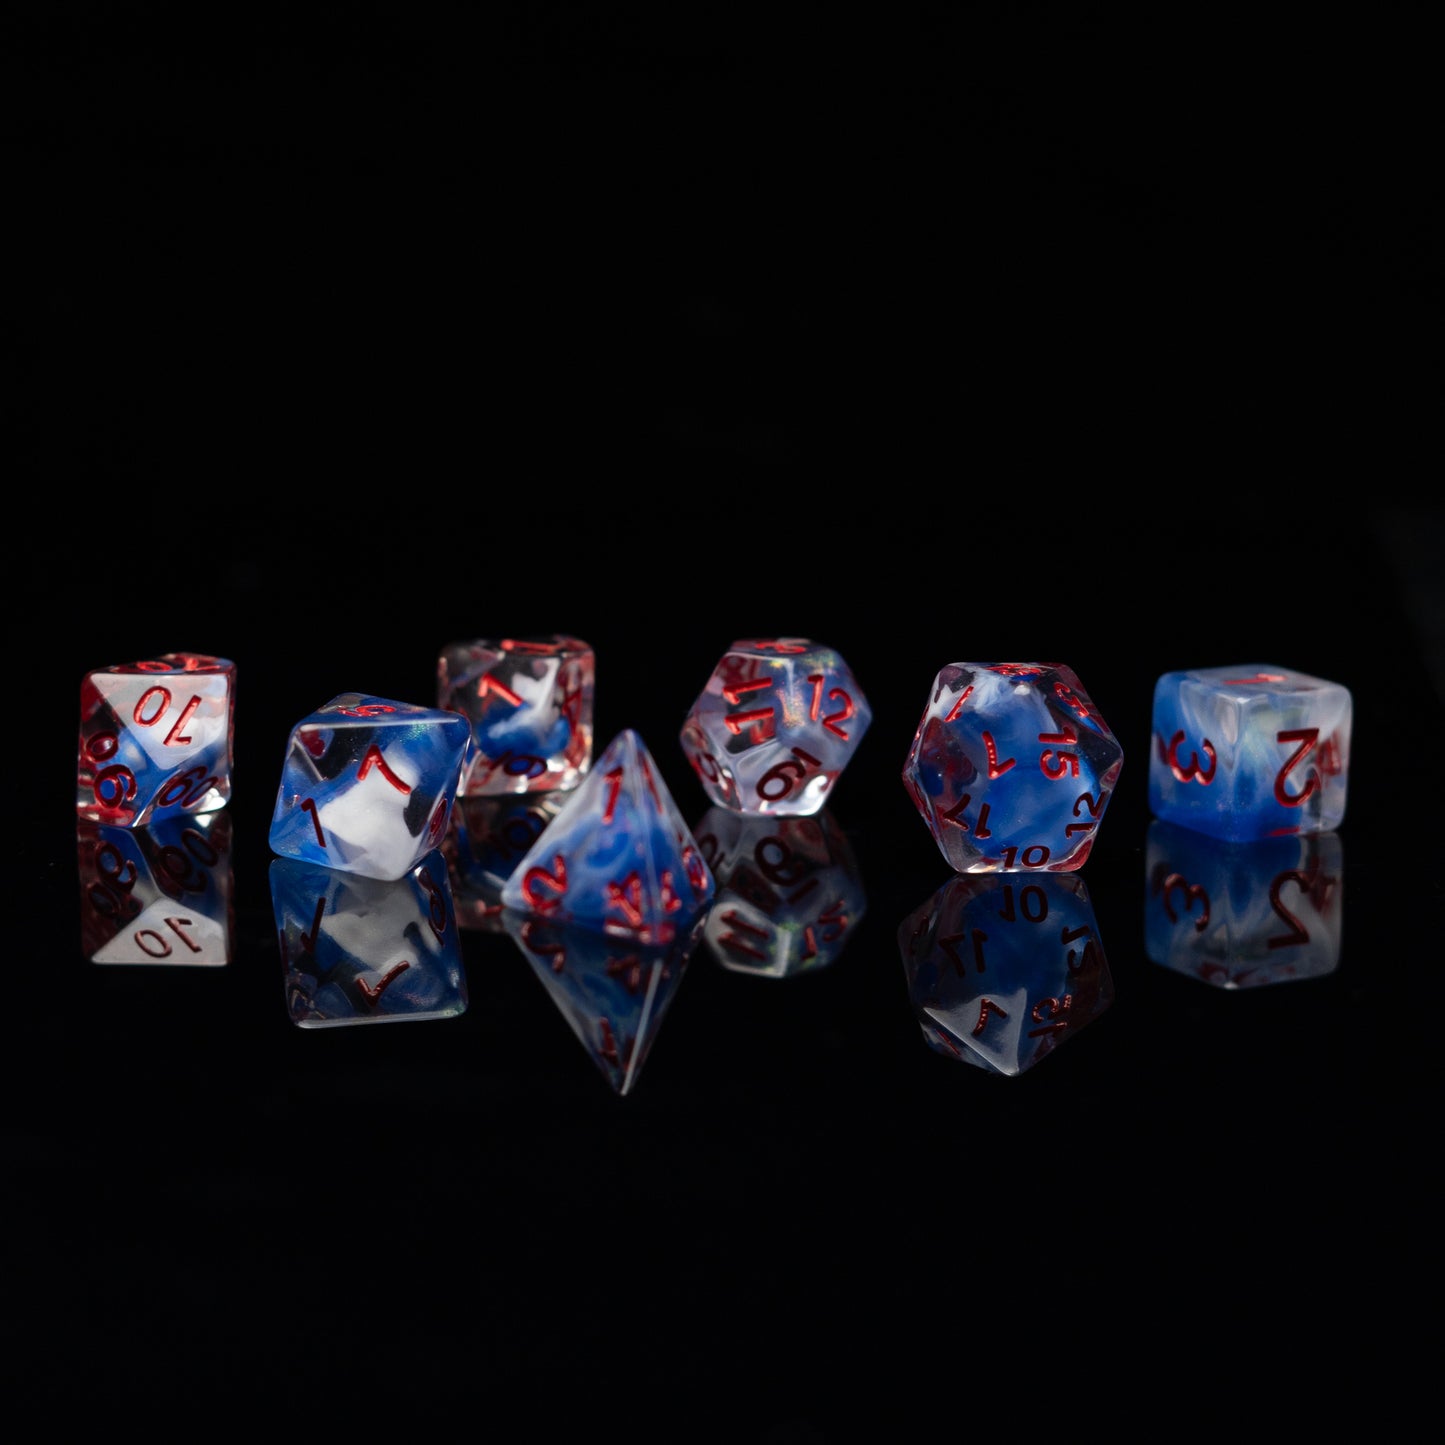 Roll Britannia Acrylic Dnd Dice Set with Red and Blue Translucent Ocean Aesthetic